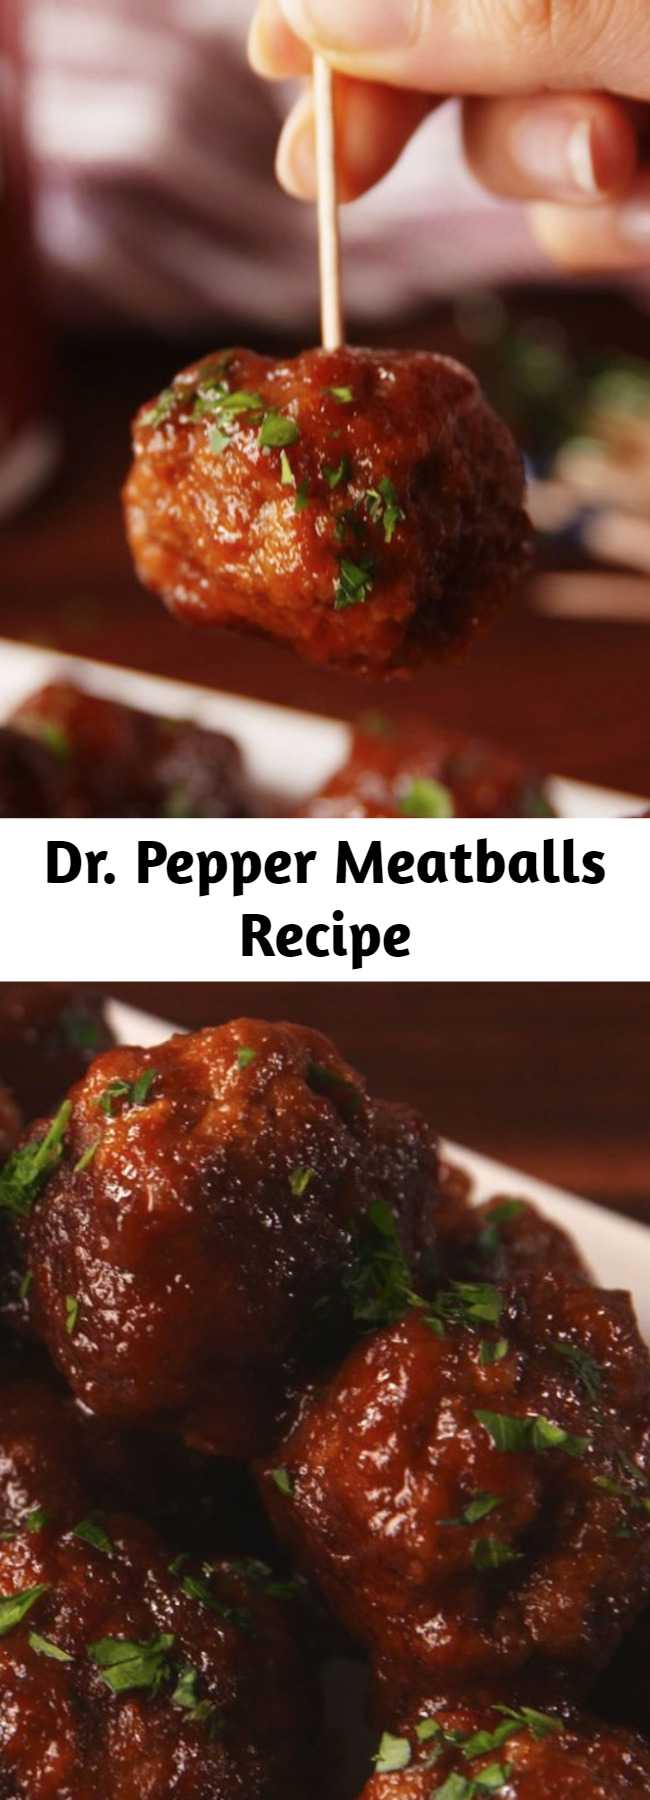 Dr. Pepper Meatballs Recipe - You'll be licking the sauce spoon, it's so good.